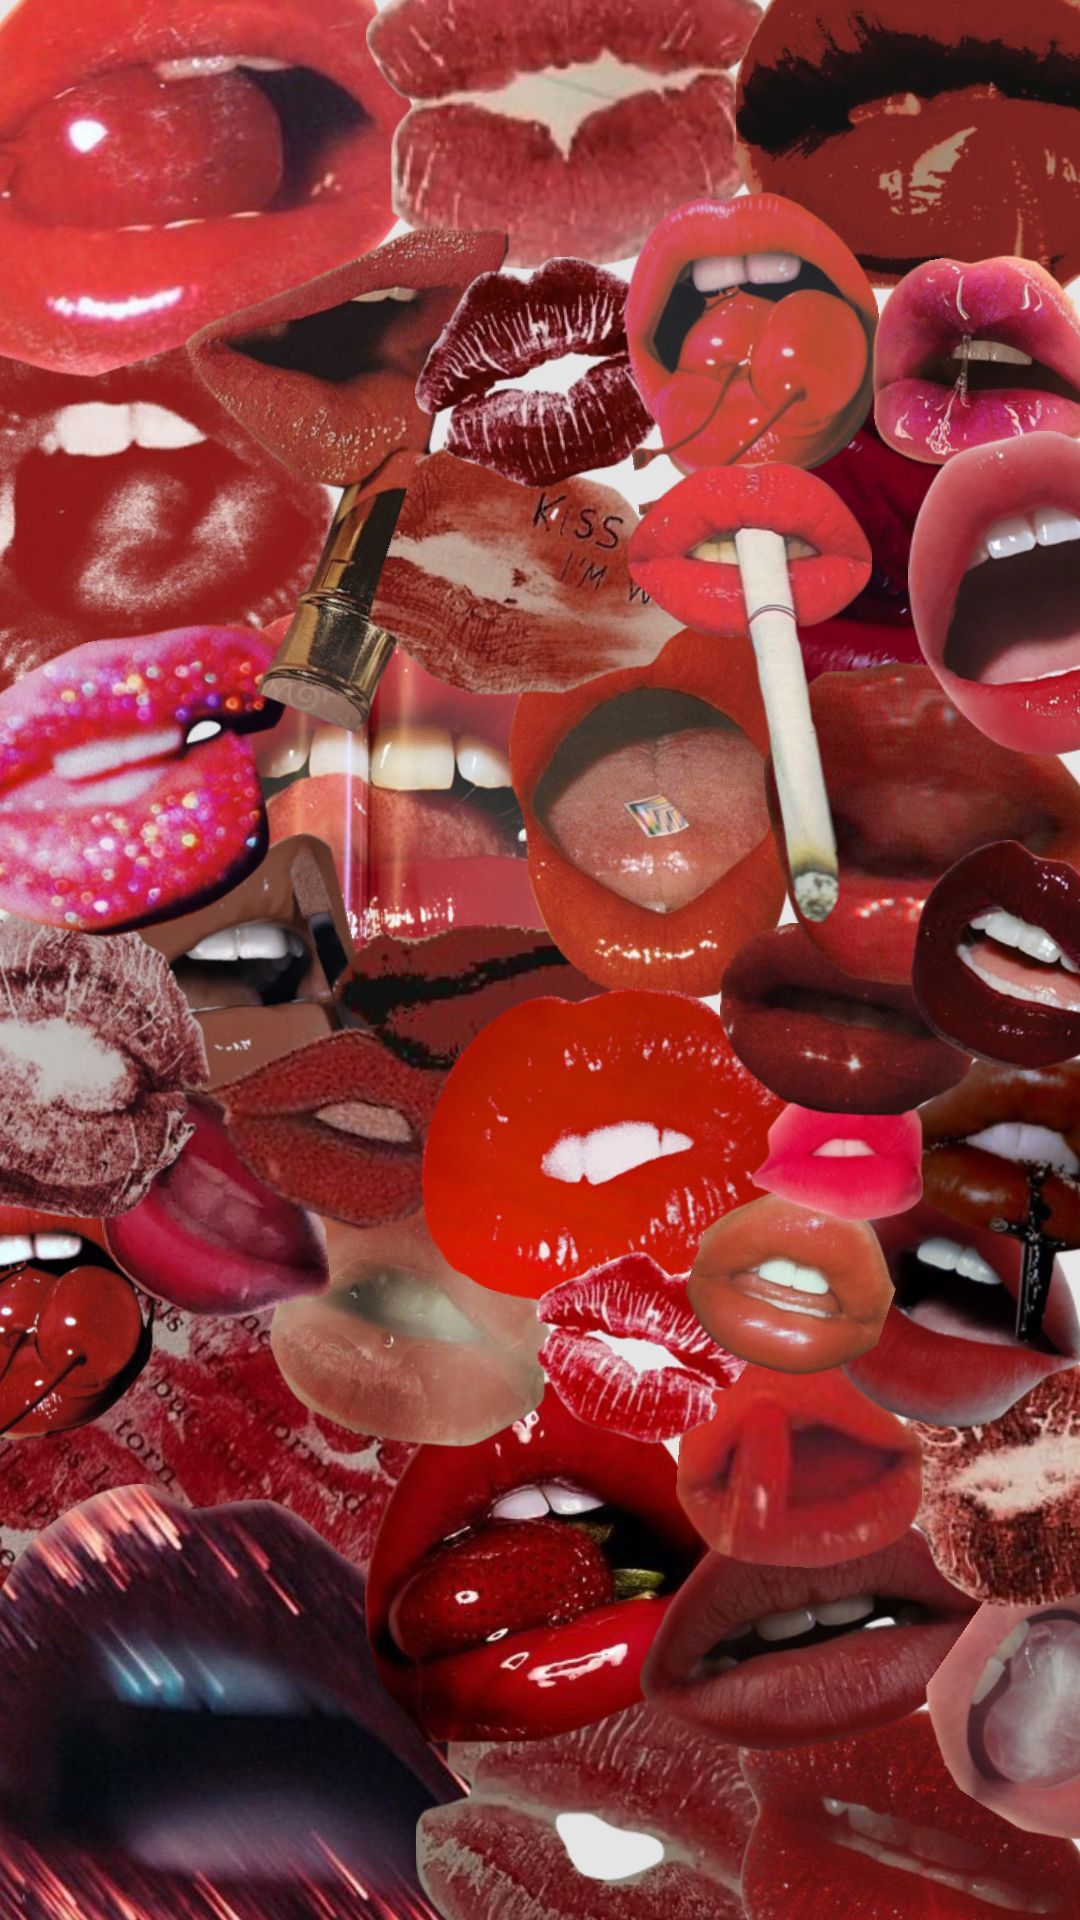 lips #red #moodboard #aesthetic #vintage #collage #lips #lipstick